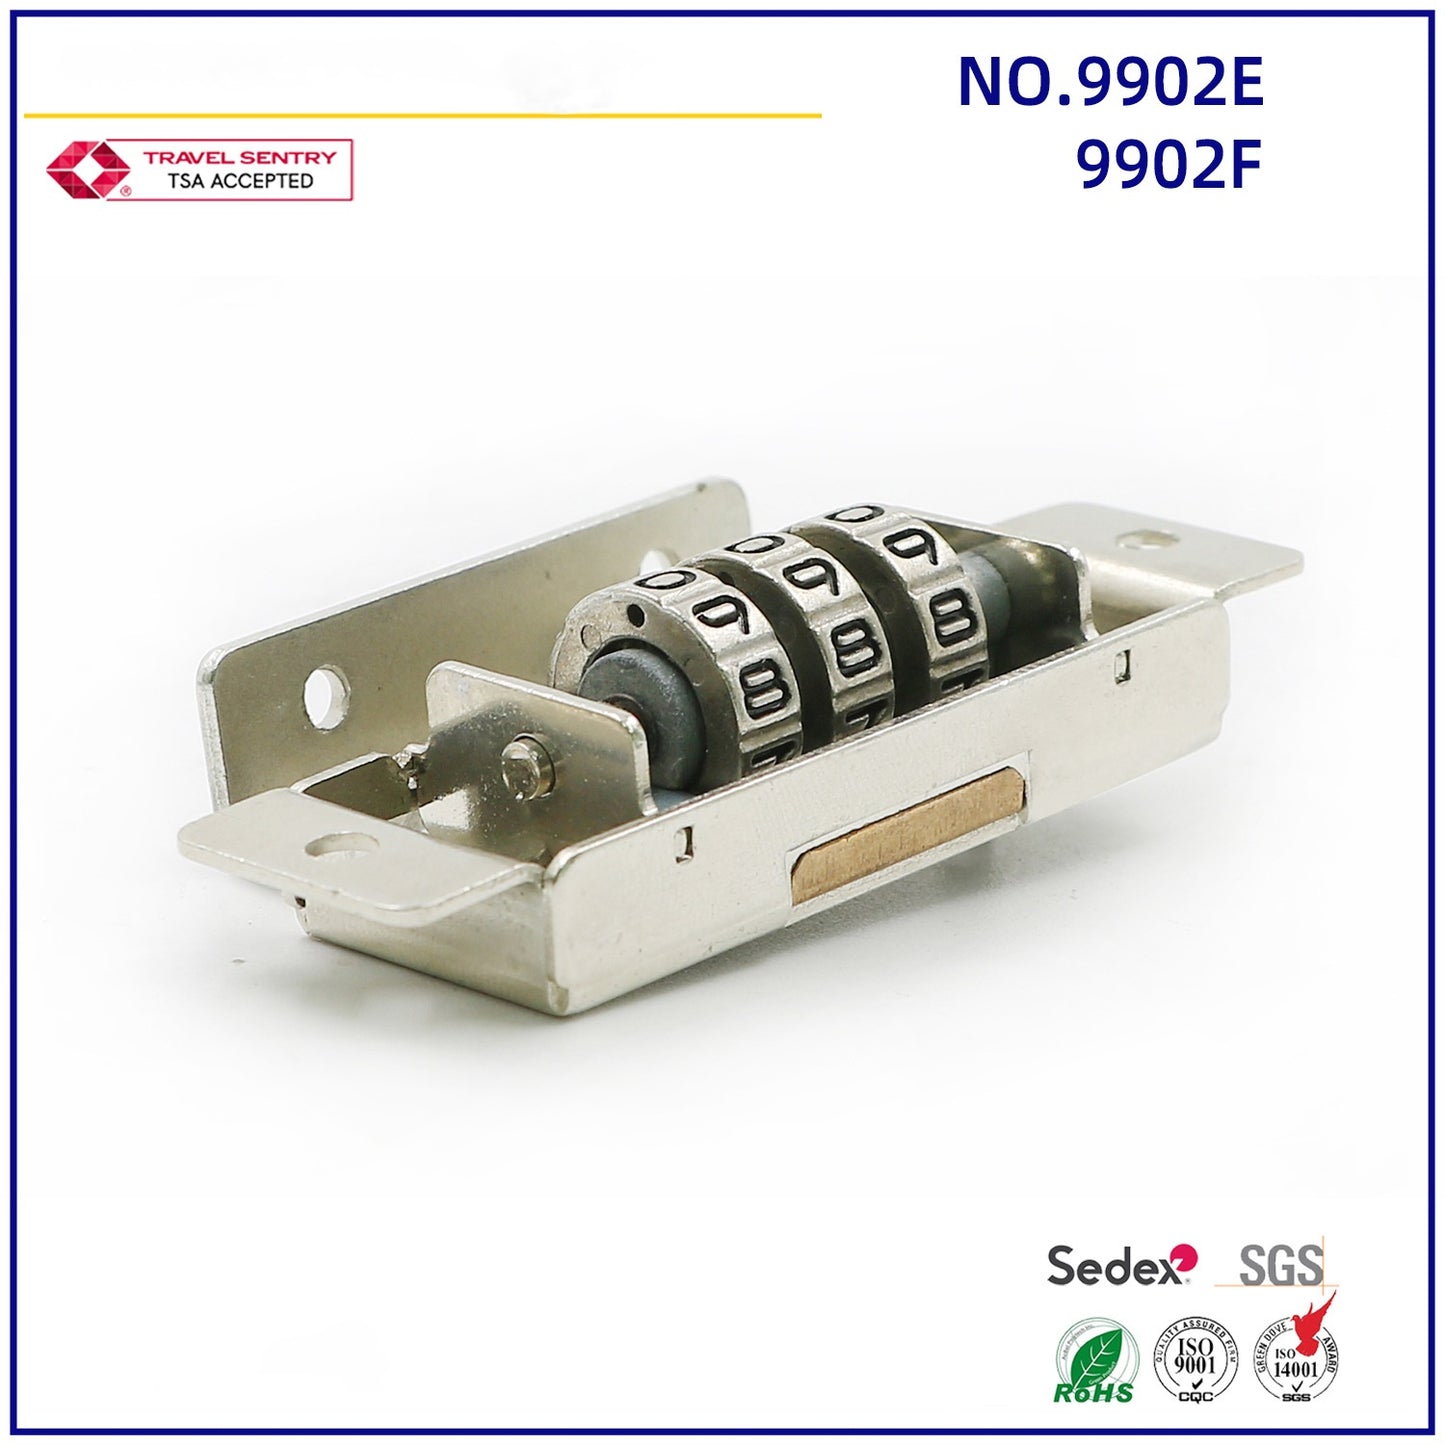 9902E/F 3-digit password security luggage lock protection box lock high quality metal jewelry built-in box lock-31